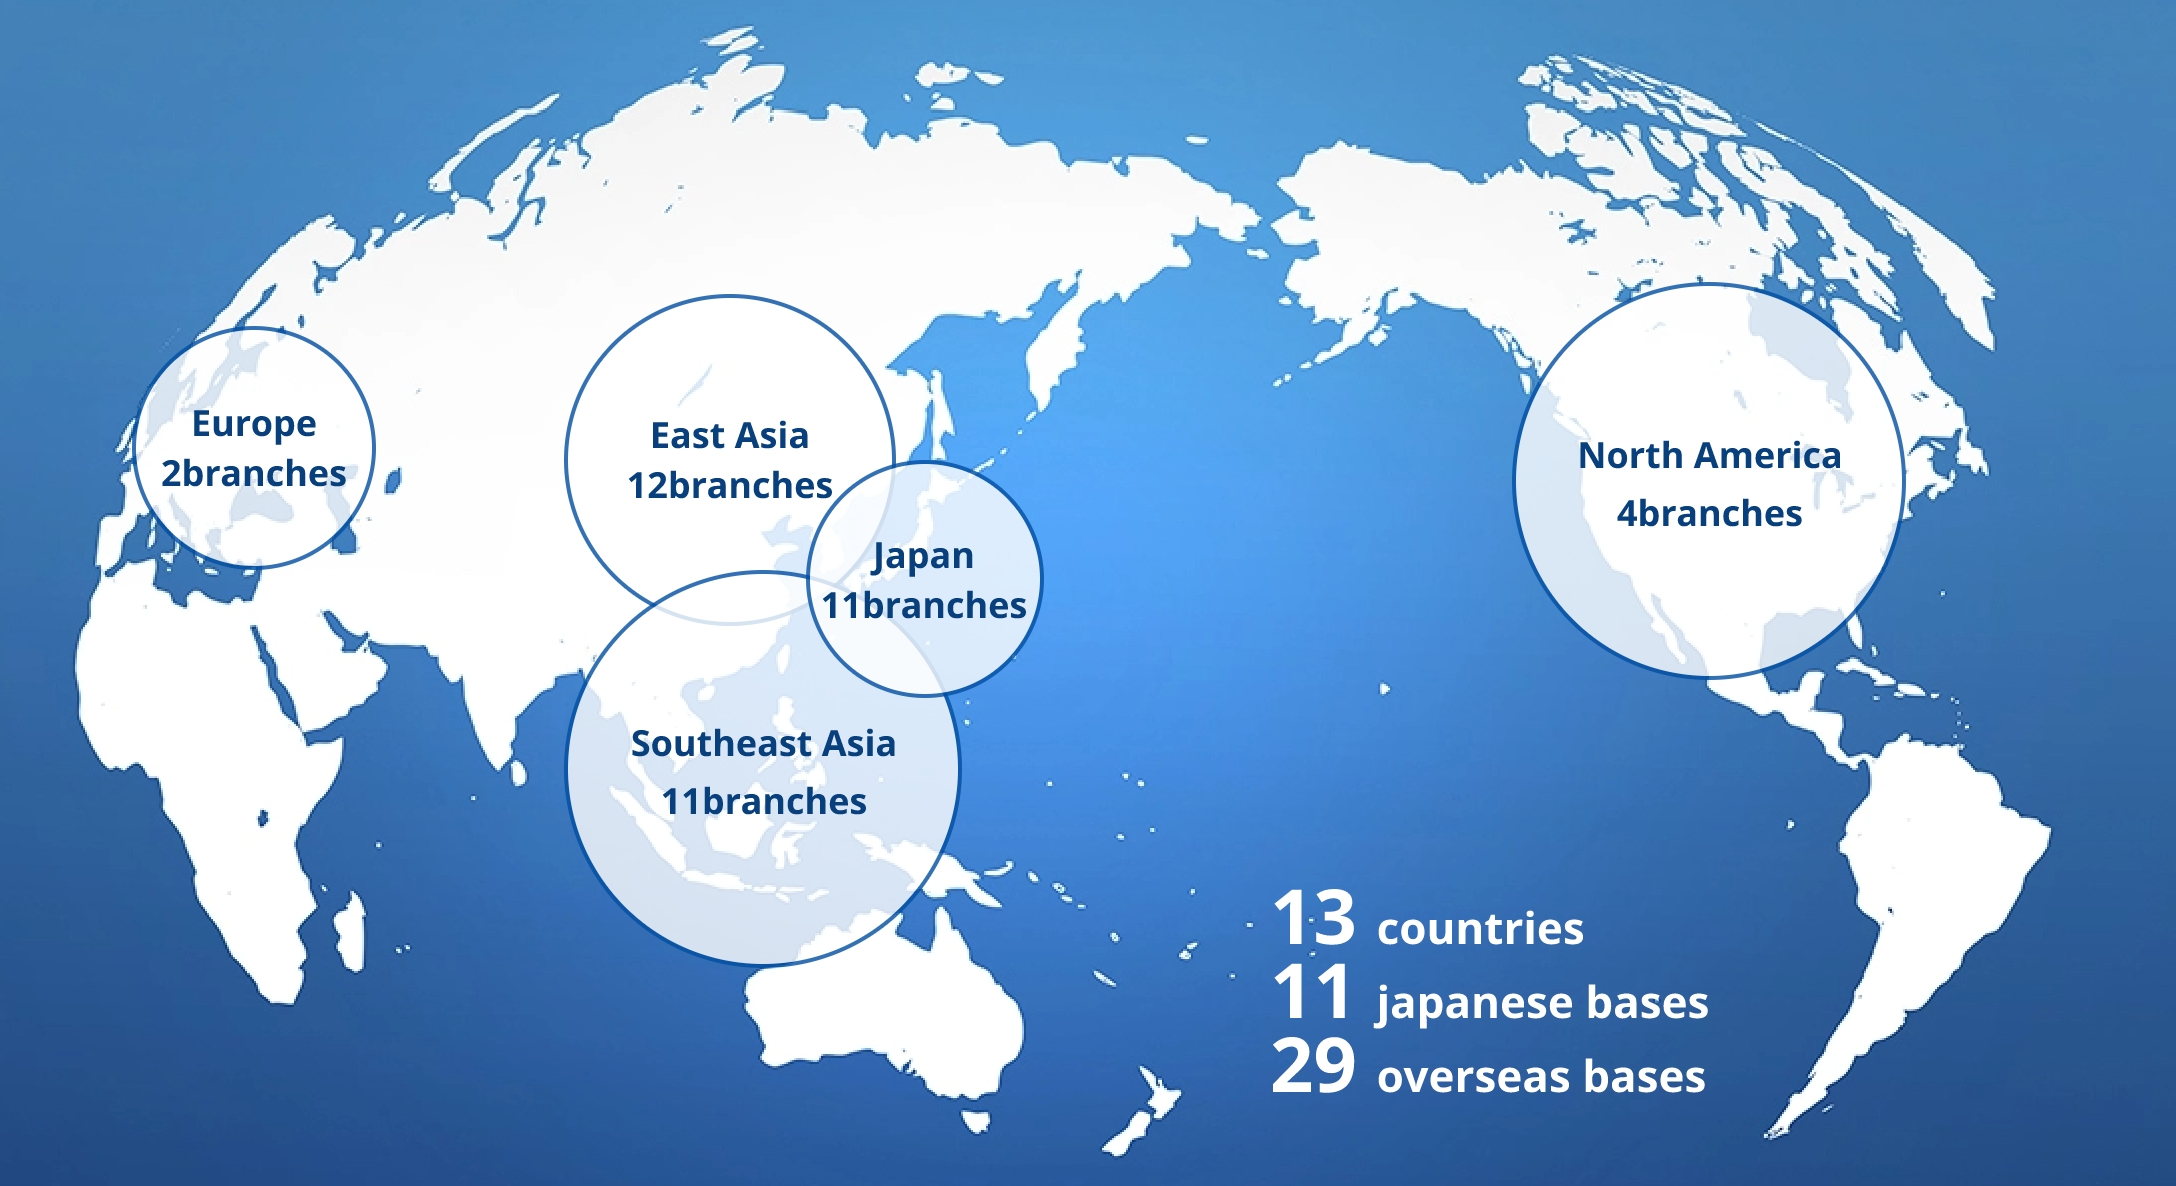 Number of overseas bases